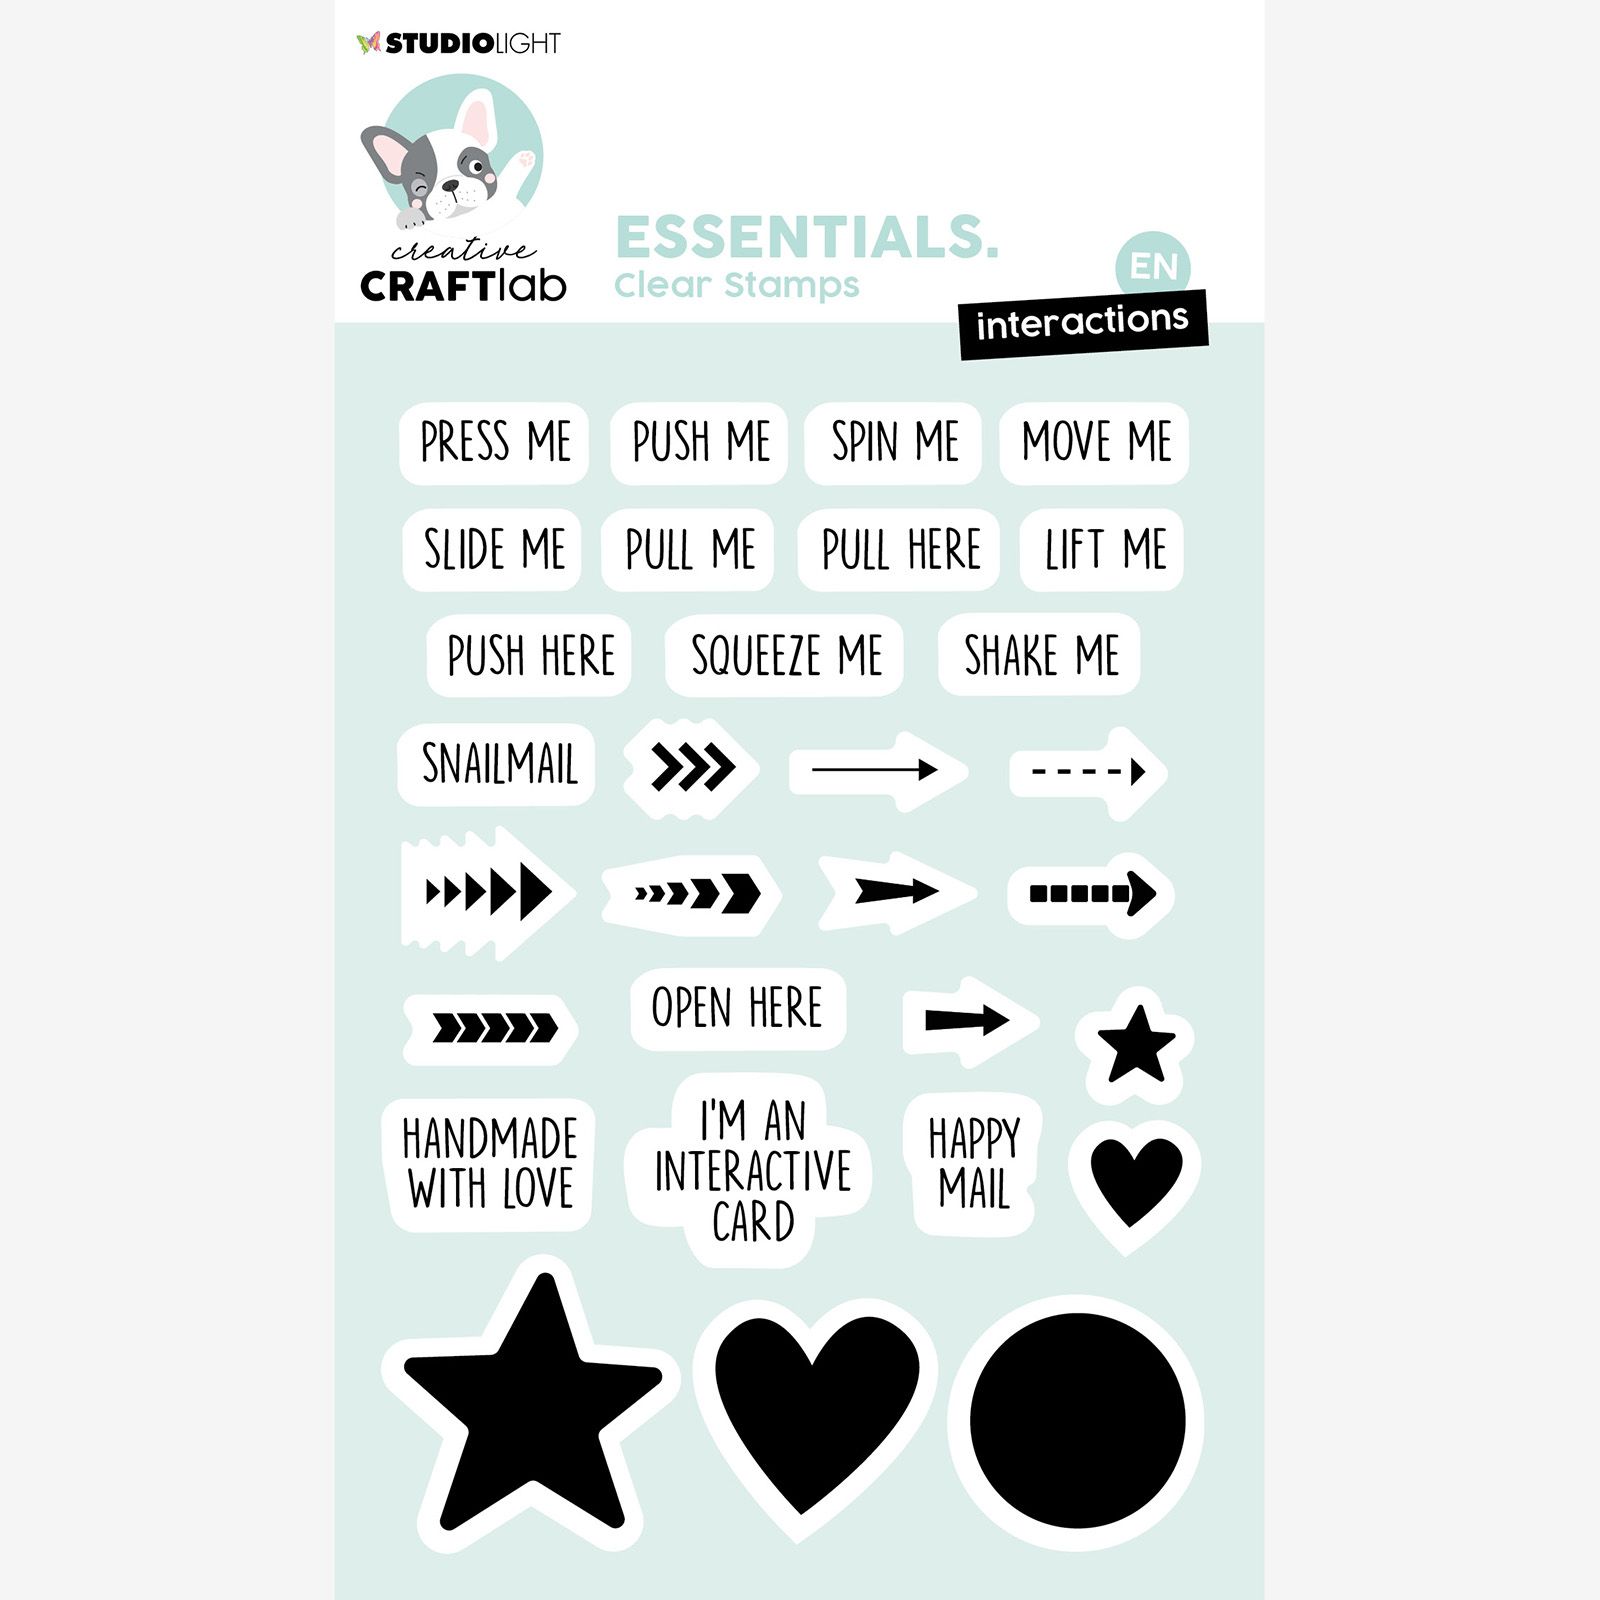 Creative Craftlab • Essentials Clear Stamp Text Interactions For Slider Pop-Up